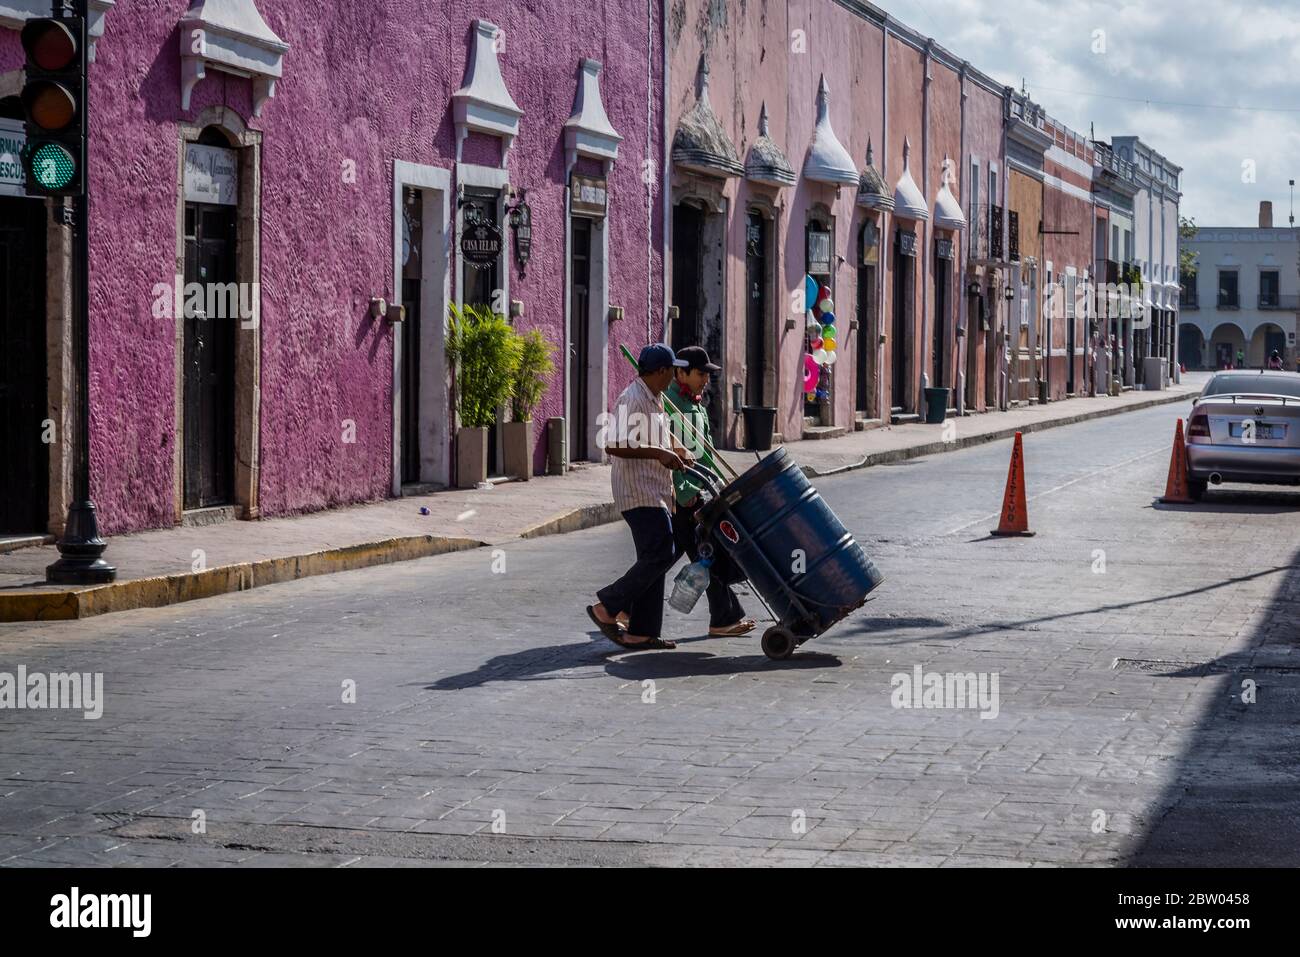 Street sweepers in typical street with beautiful pastel-painted houses, Valladolid, Yucatan, Mexico Stock Photo